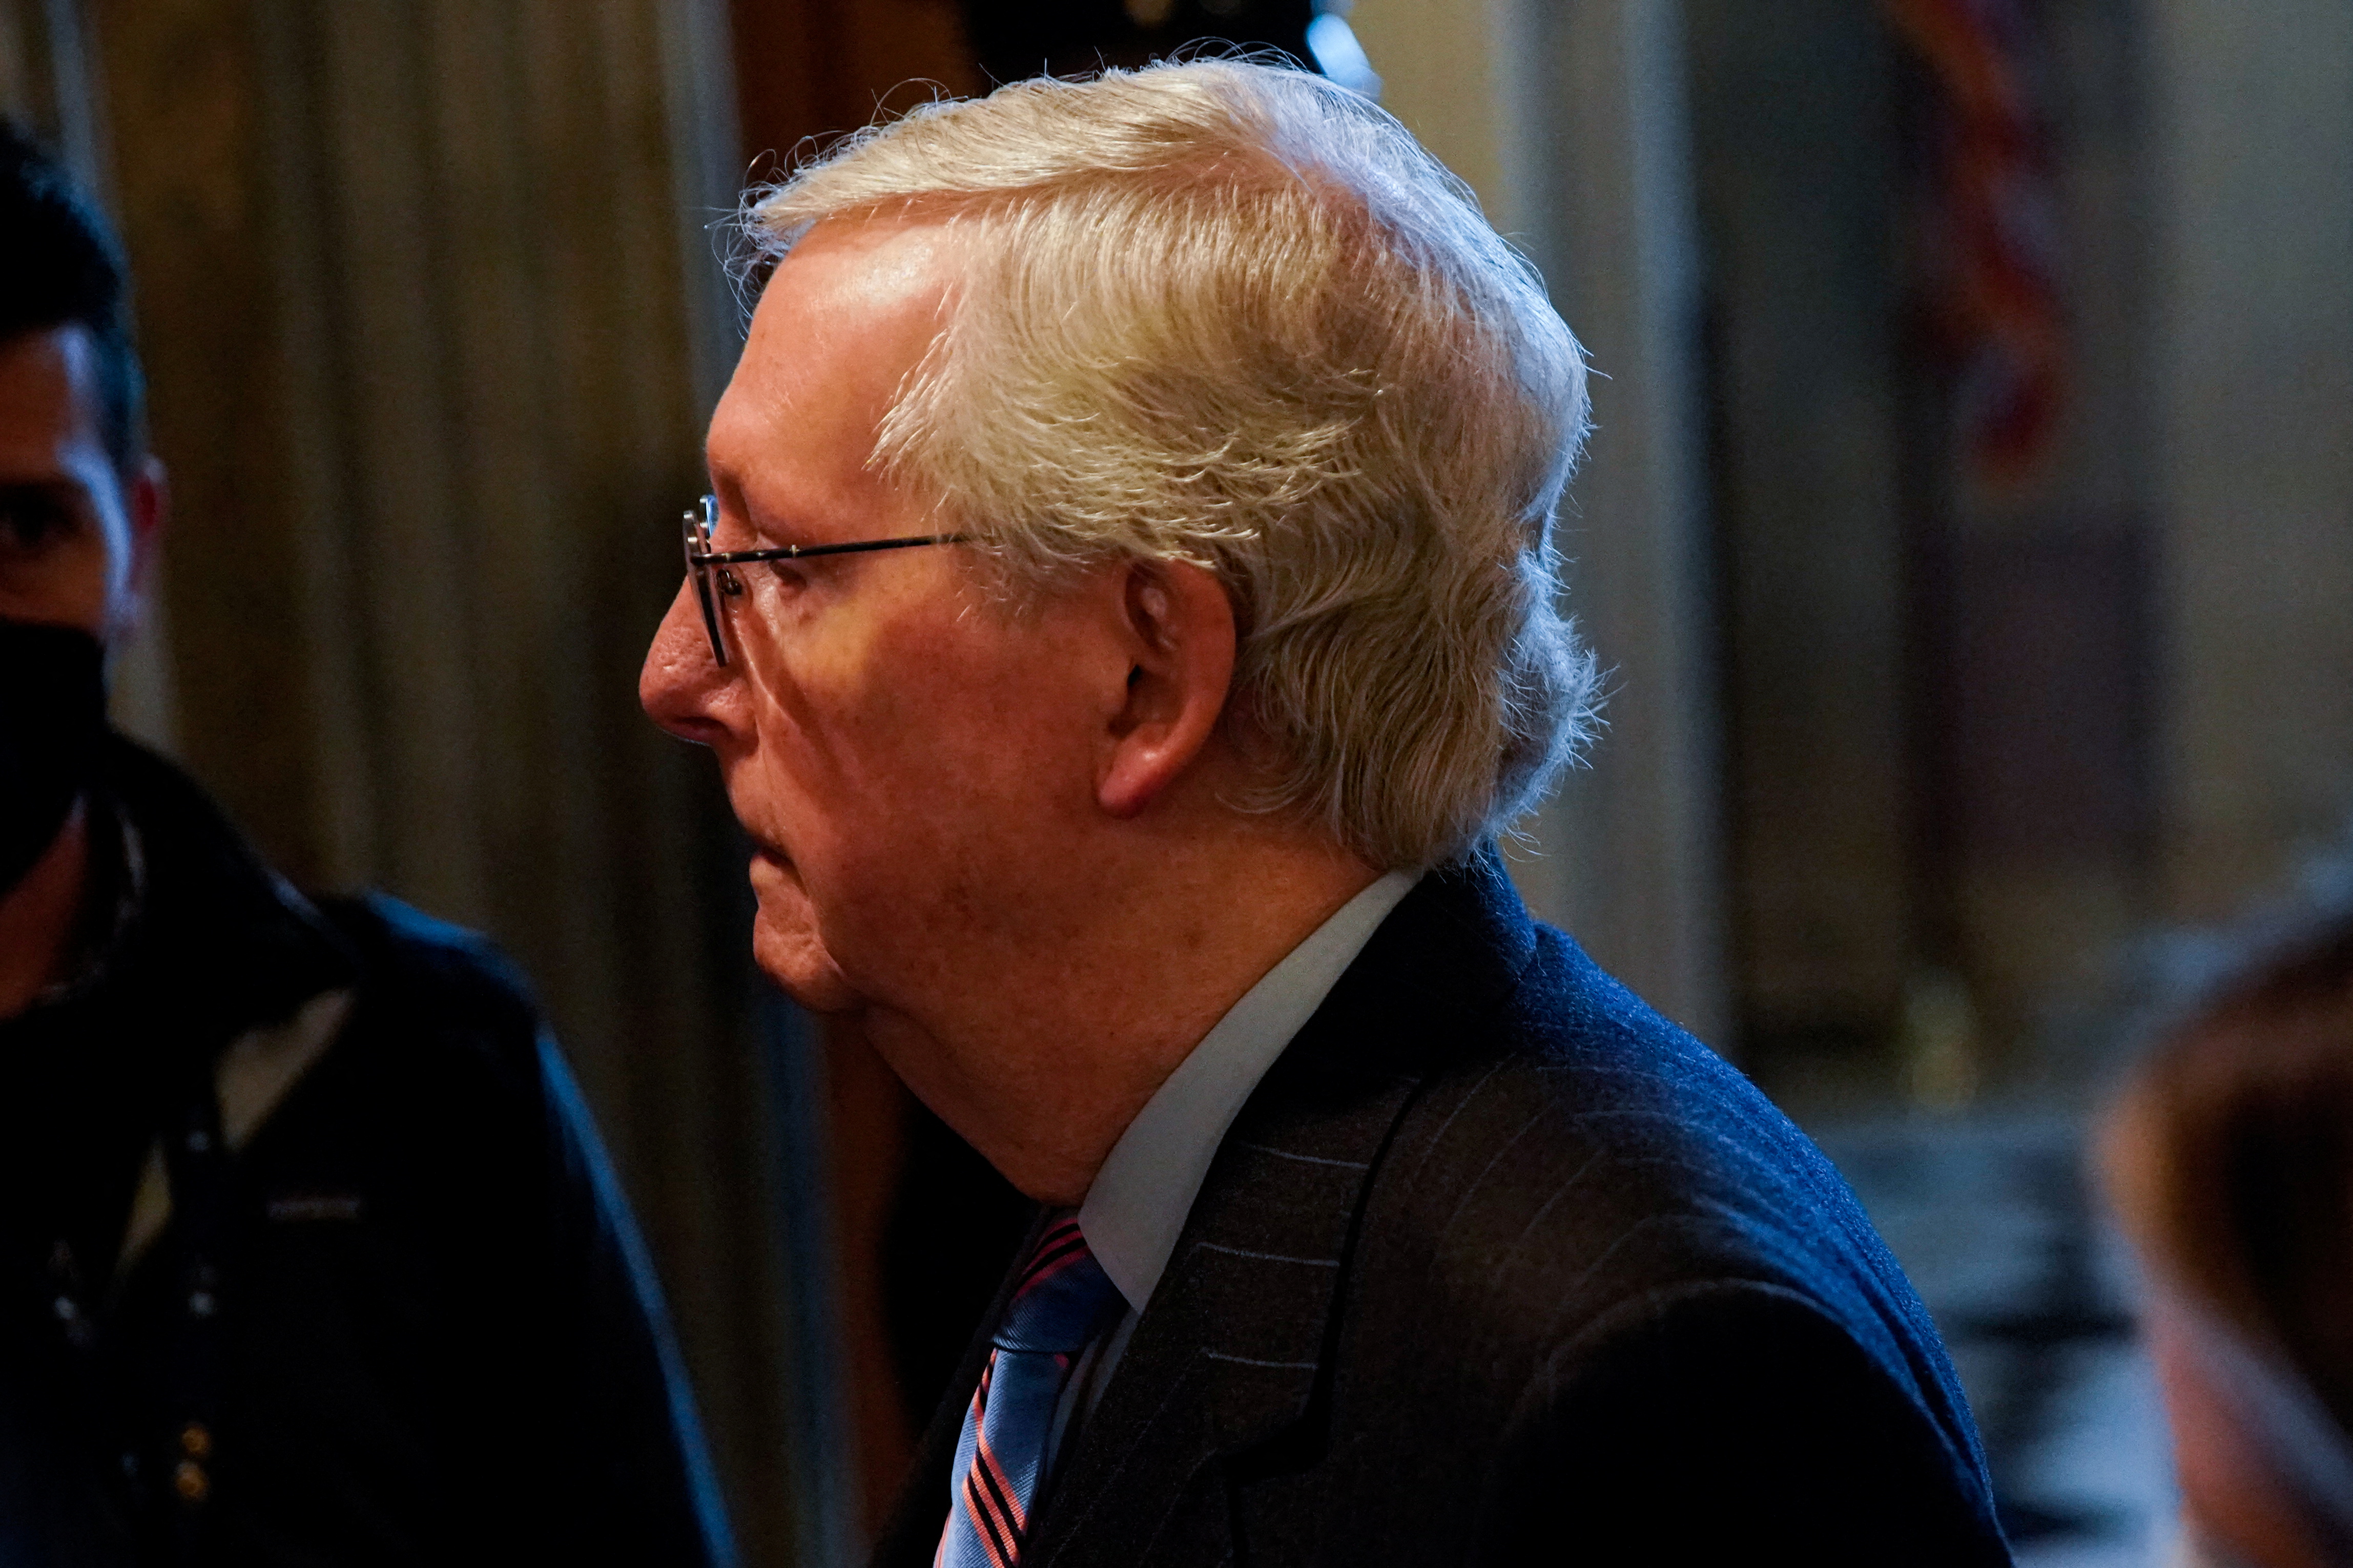 U.S. Senate Minority Leader Mitch McConnell (R-KY) waits for an elevator at the U.S. Capitol in Washington